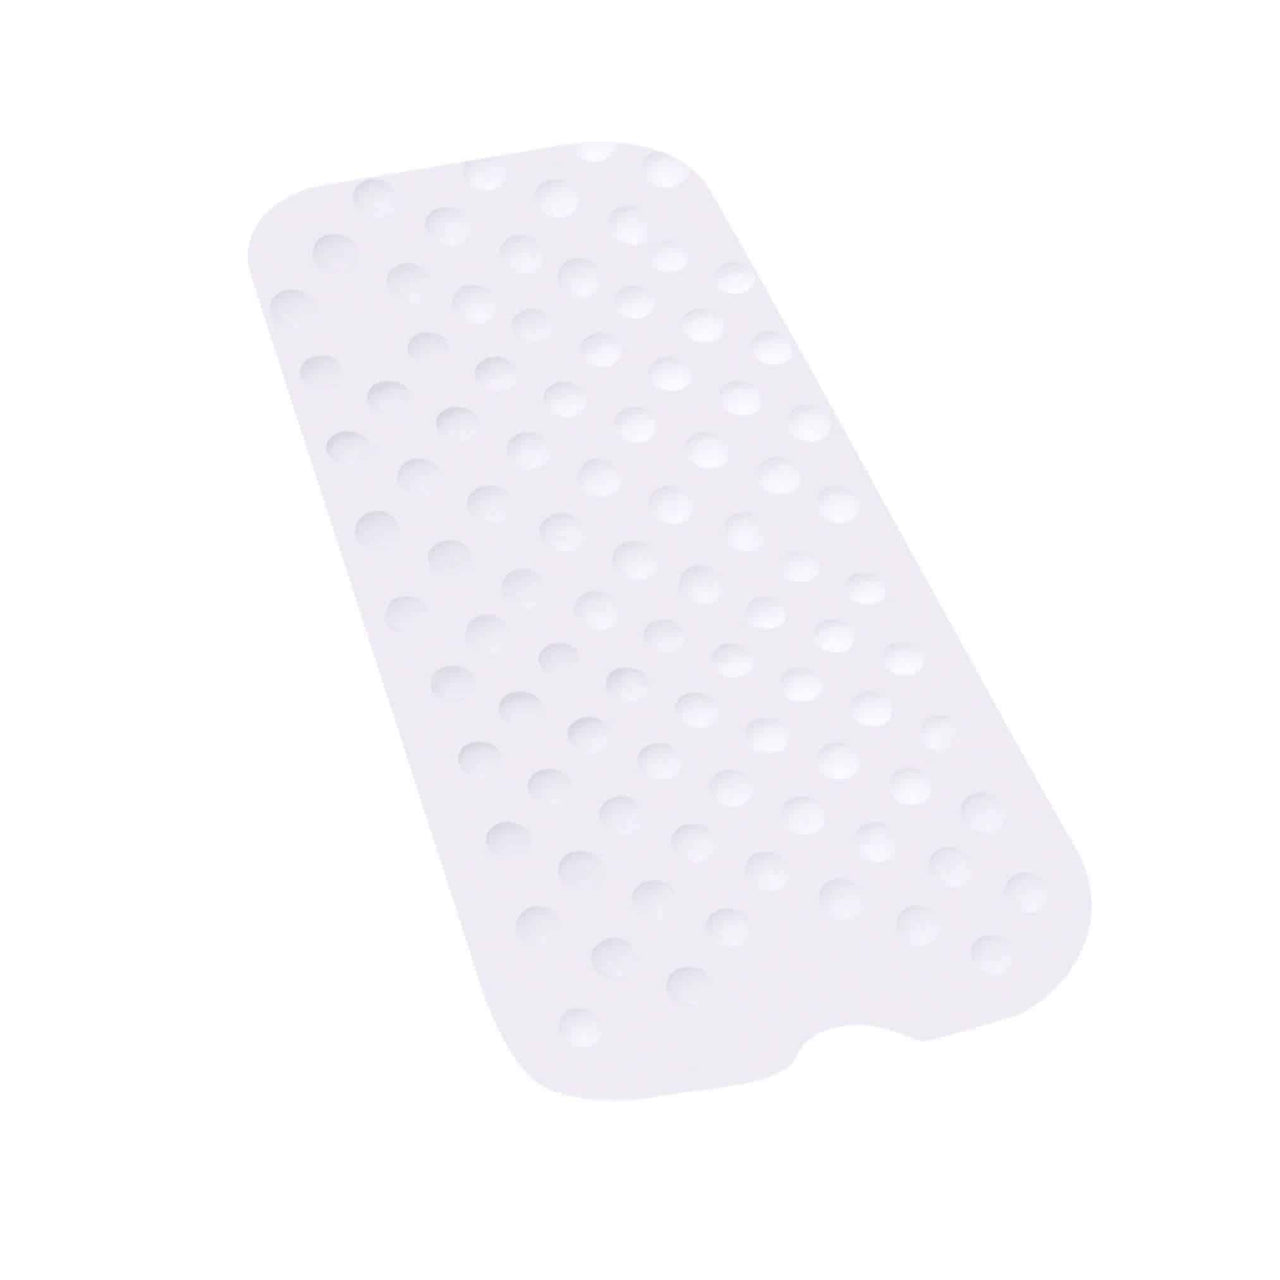 Theracare Non-slip Bath Mat For Tubs, Showers - Antifungal - 15 In